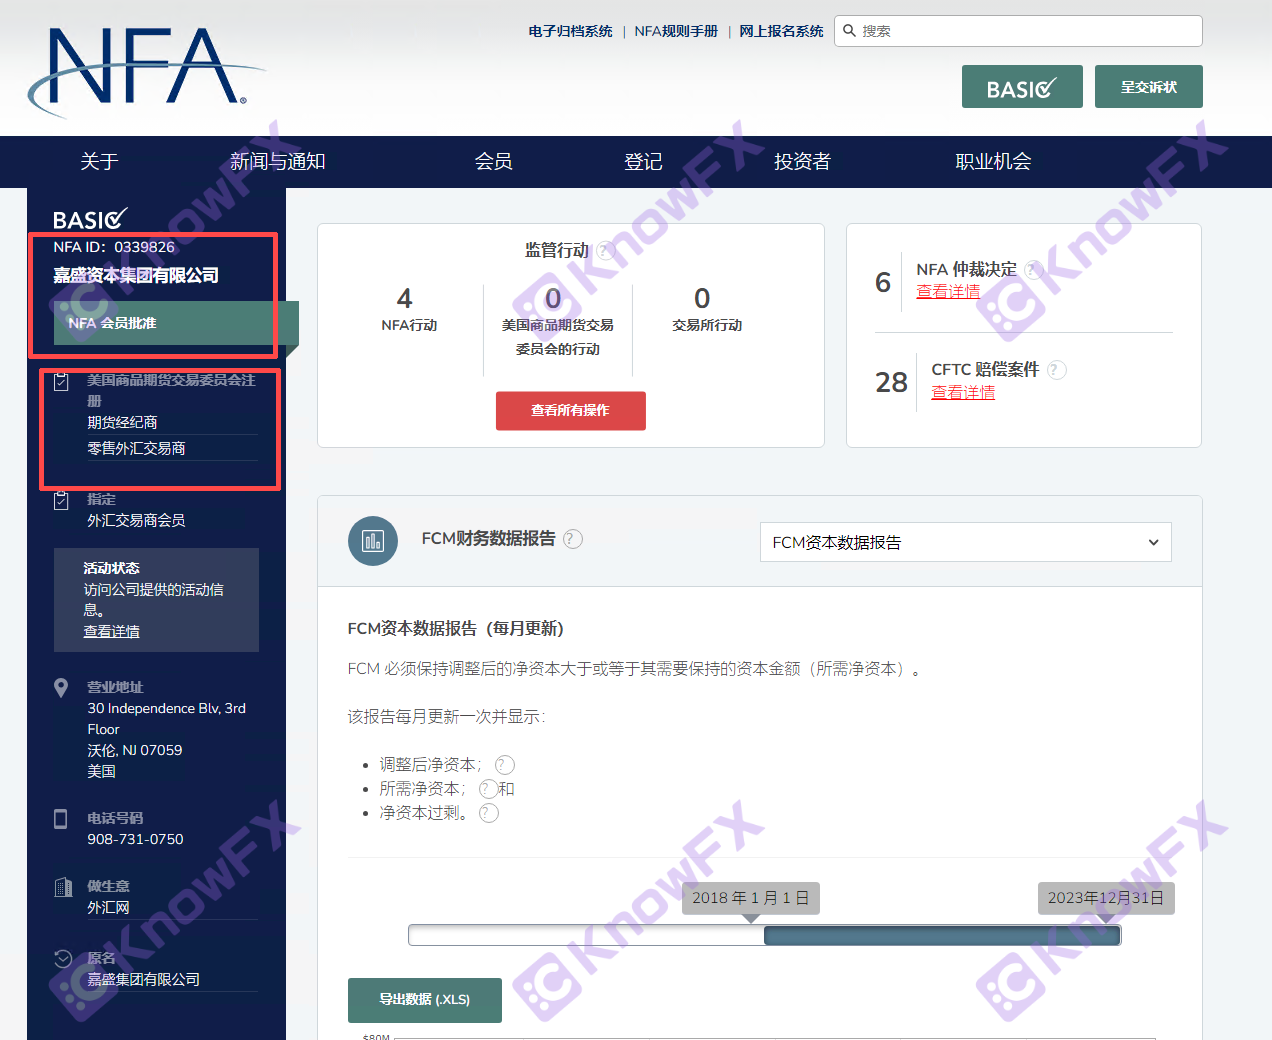 Foreign promotion of foreign exchange brokers FOREX!Regulatory issues are frequent!There is a problem with the server!Intersection-第14张图片-要懂汇圈网